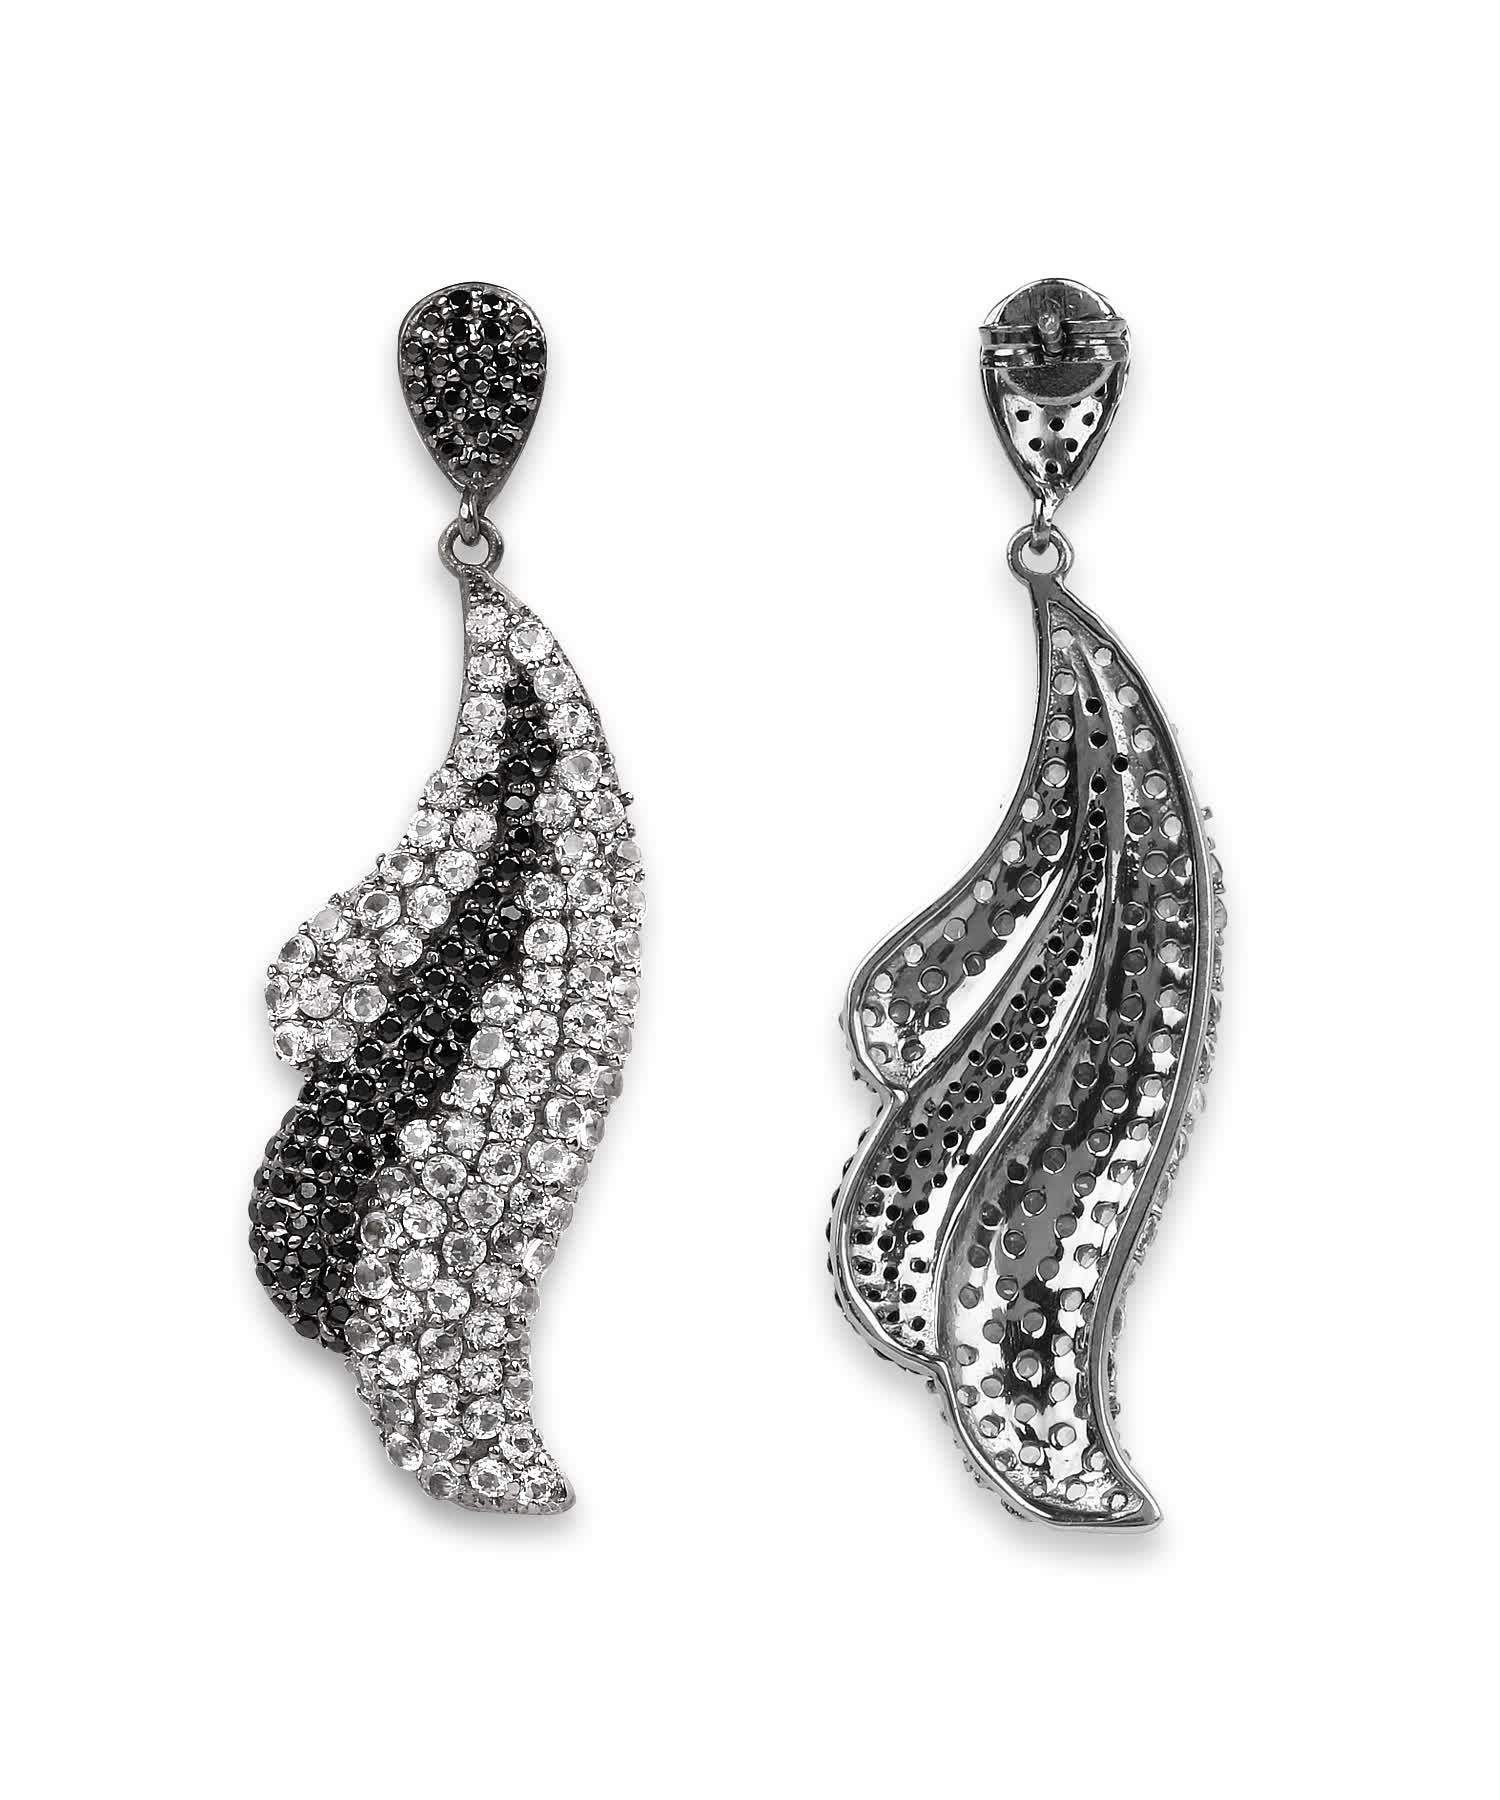 3.28ctw Natural White Topaz and Black Spinel Rhodium Plated 925 Sterling Silver Leaf Dangle Earrings View 2